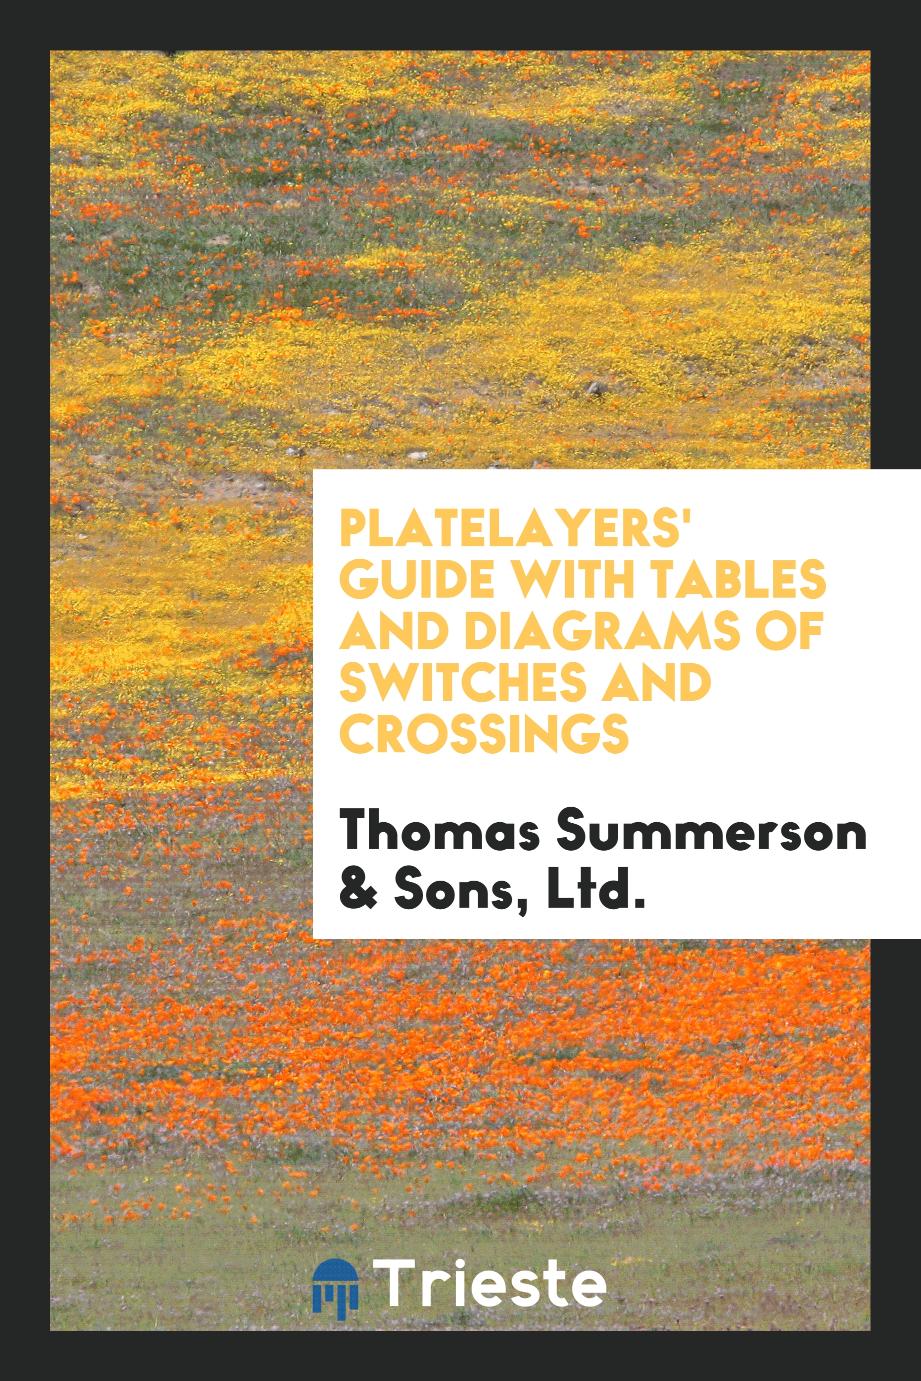 Platelayers' Guide with Tables and Diagrams of Switches and Crossings